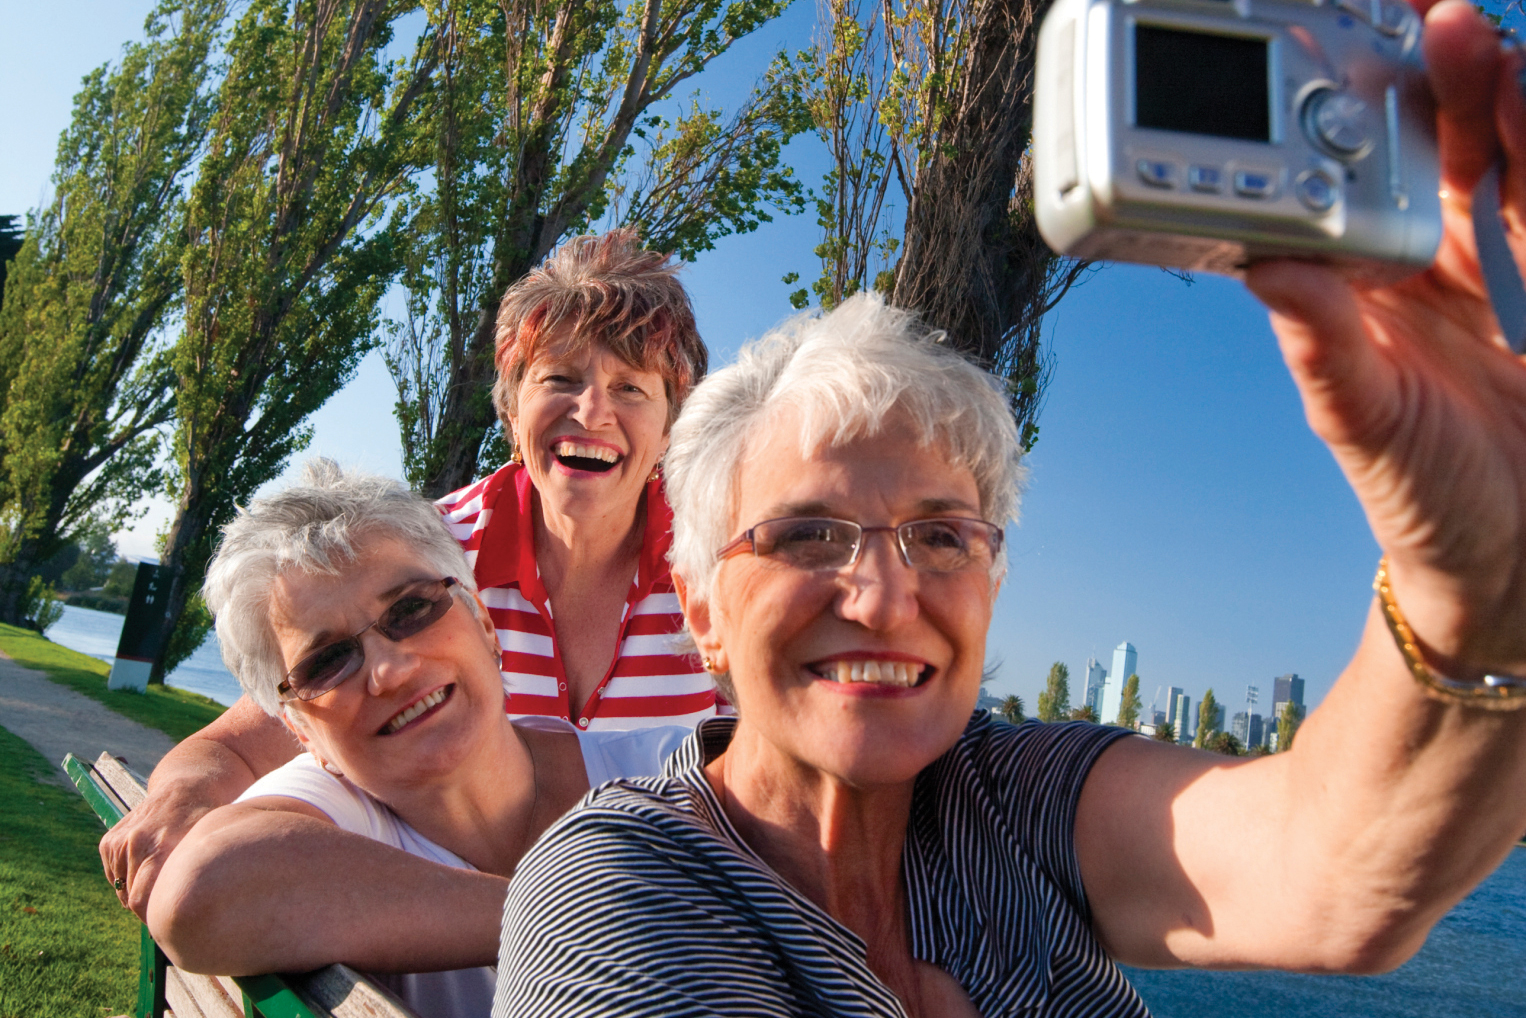 Three older women take a photo of themselves on a park bench.